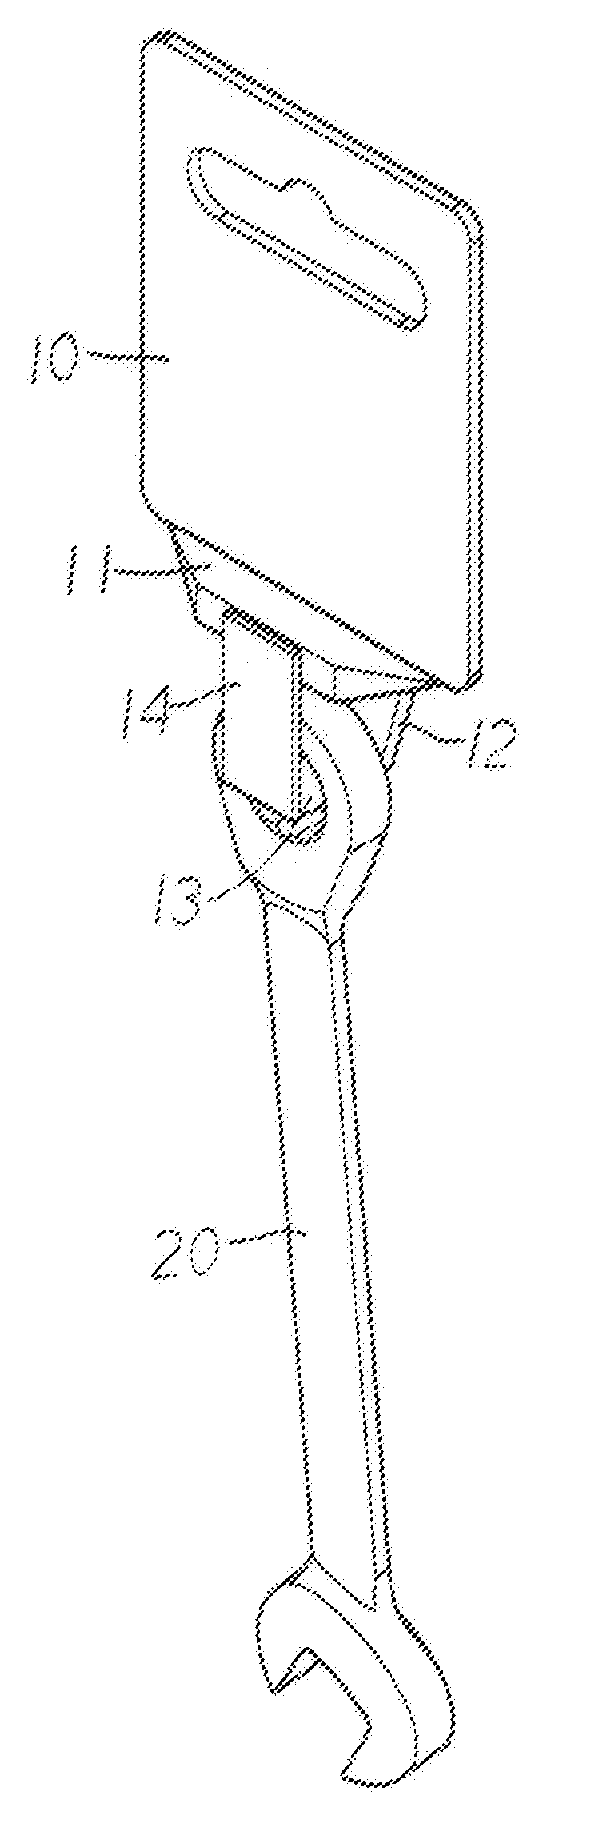 Suspension device for hand tools having ring portion